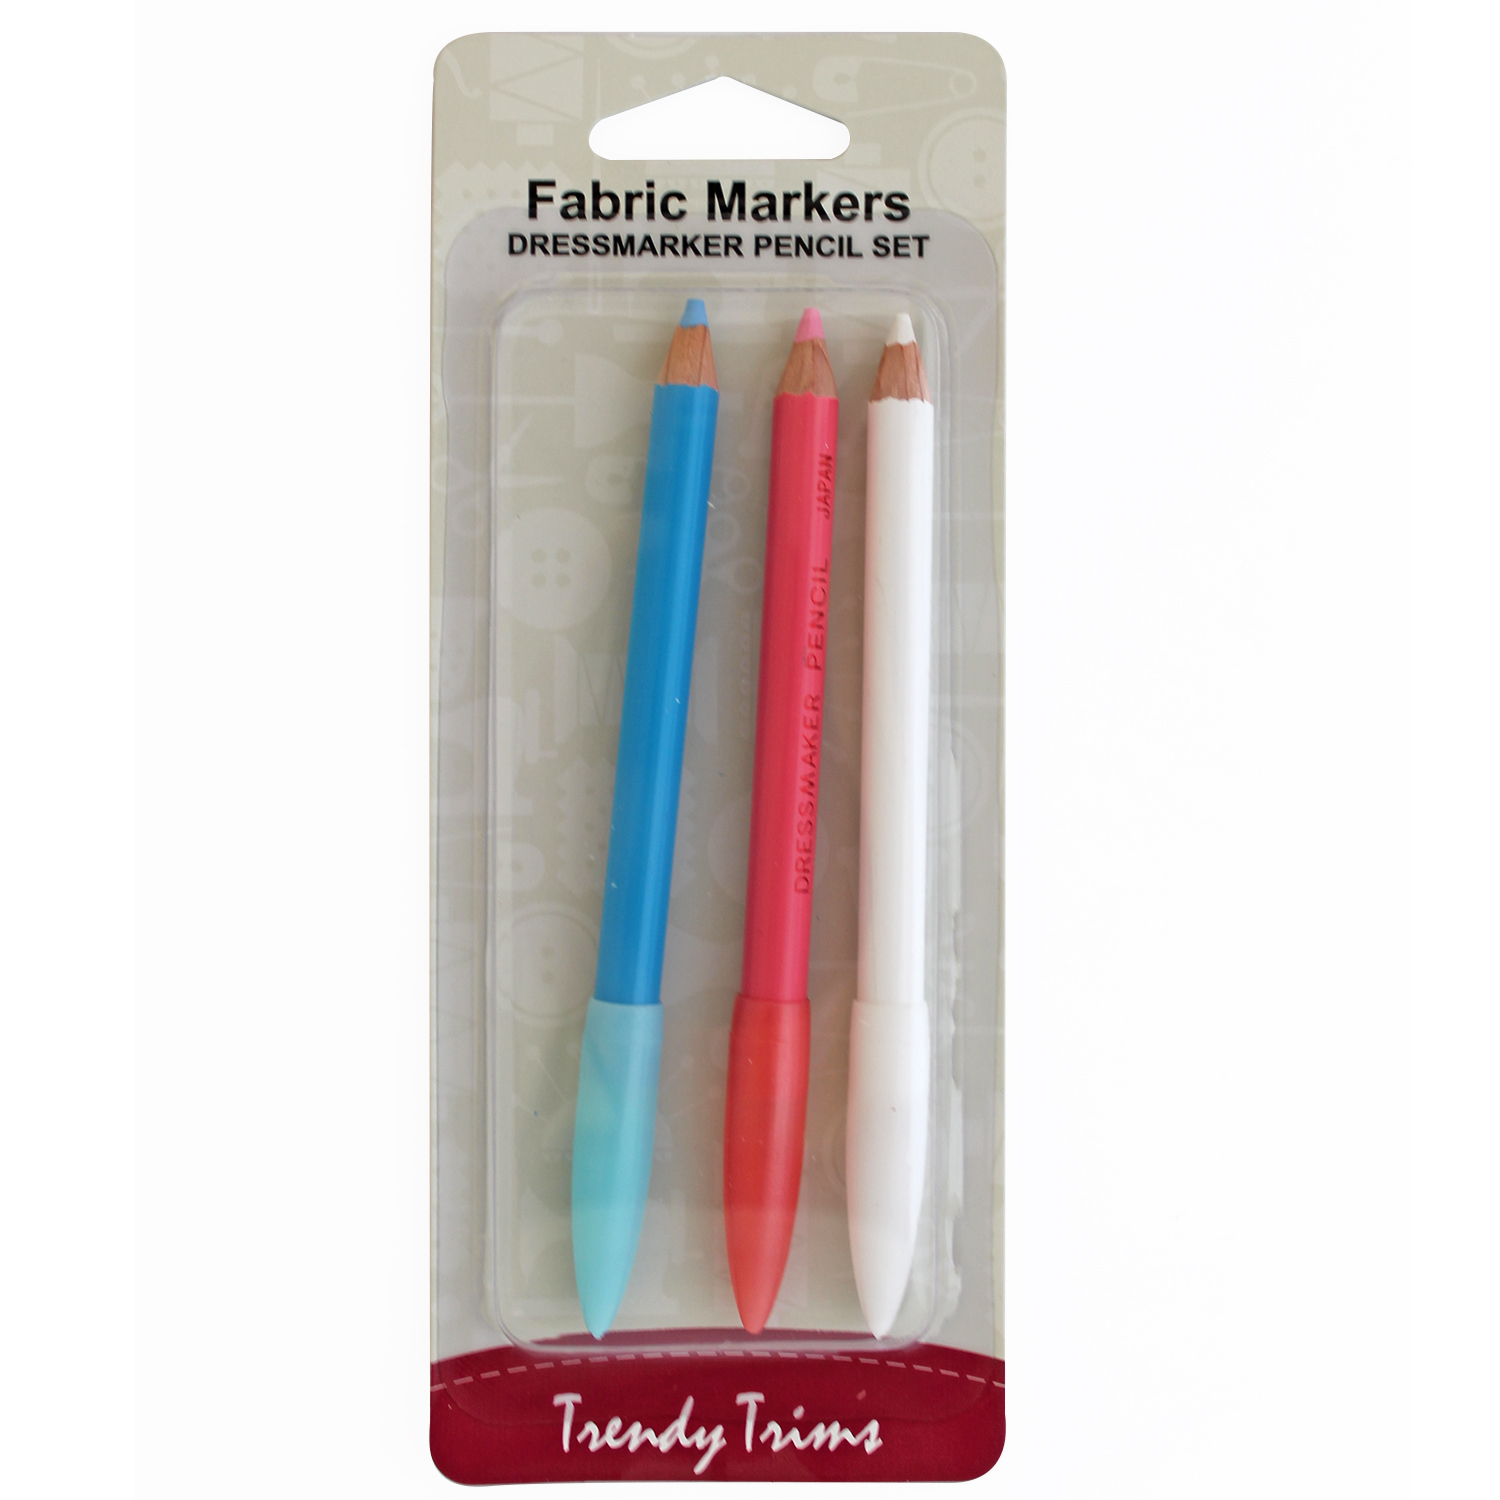 Chalk Pencils - Tulip Company Limited - Set of 3 Blue, White Pink